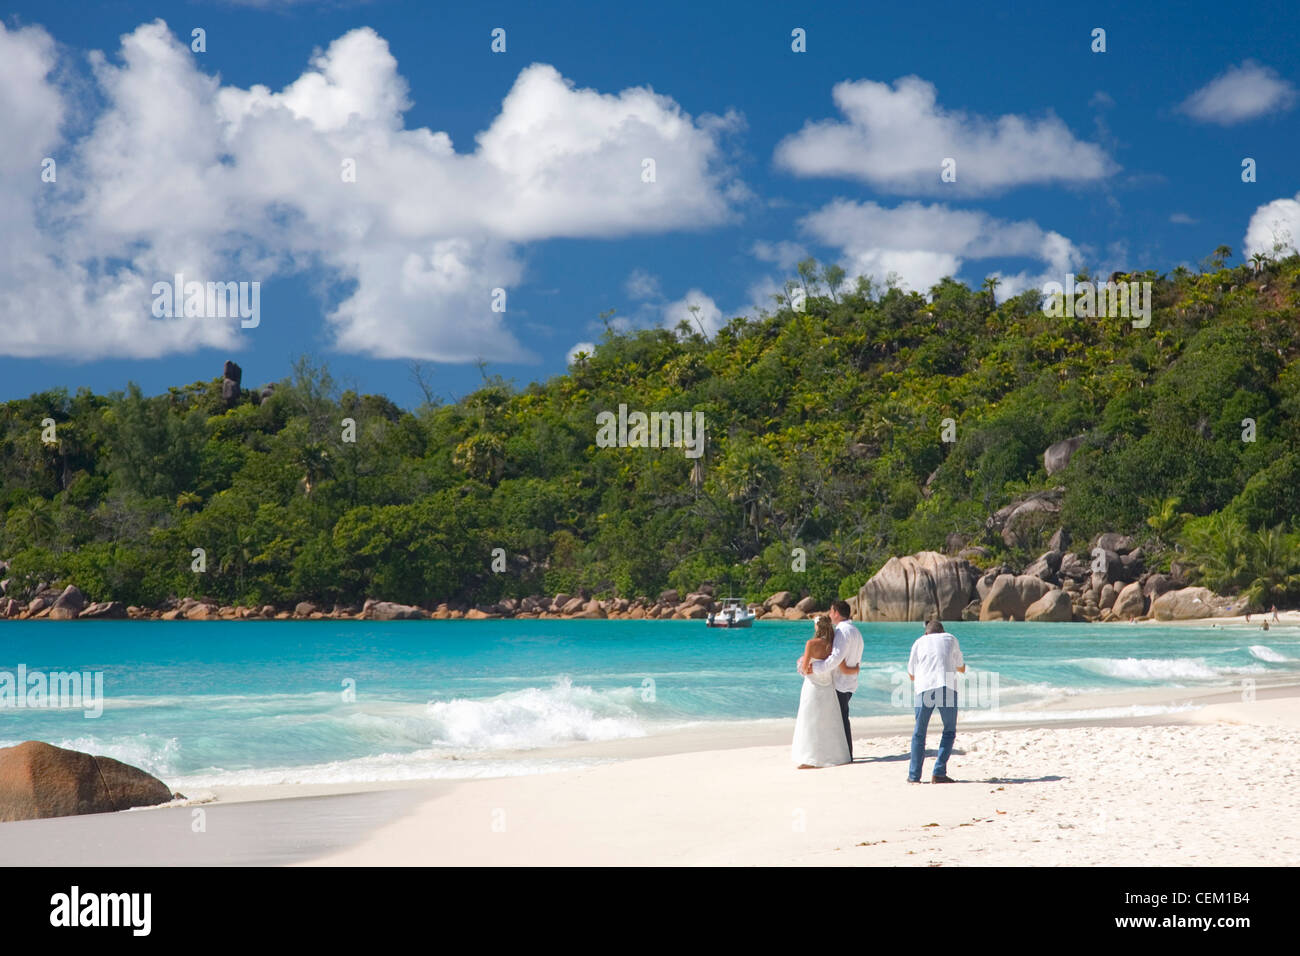 Anse Lazio, Praslin, Seychelles. Newly-weds being photographed on the beach. Stock Photo